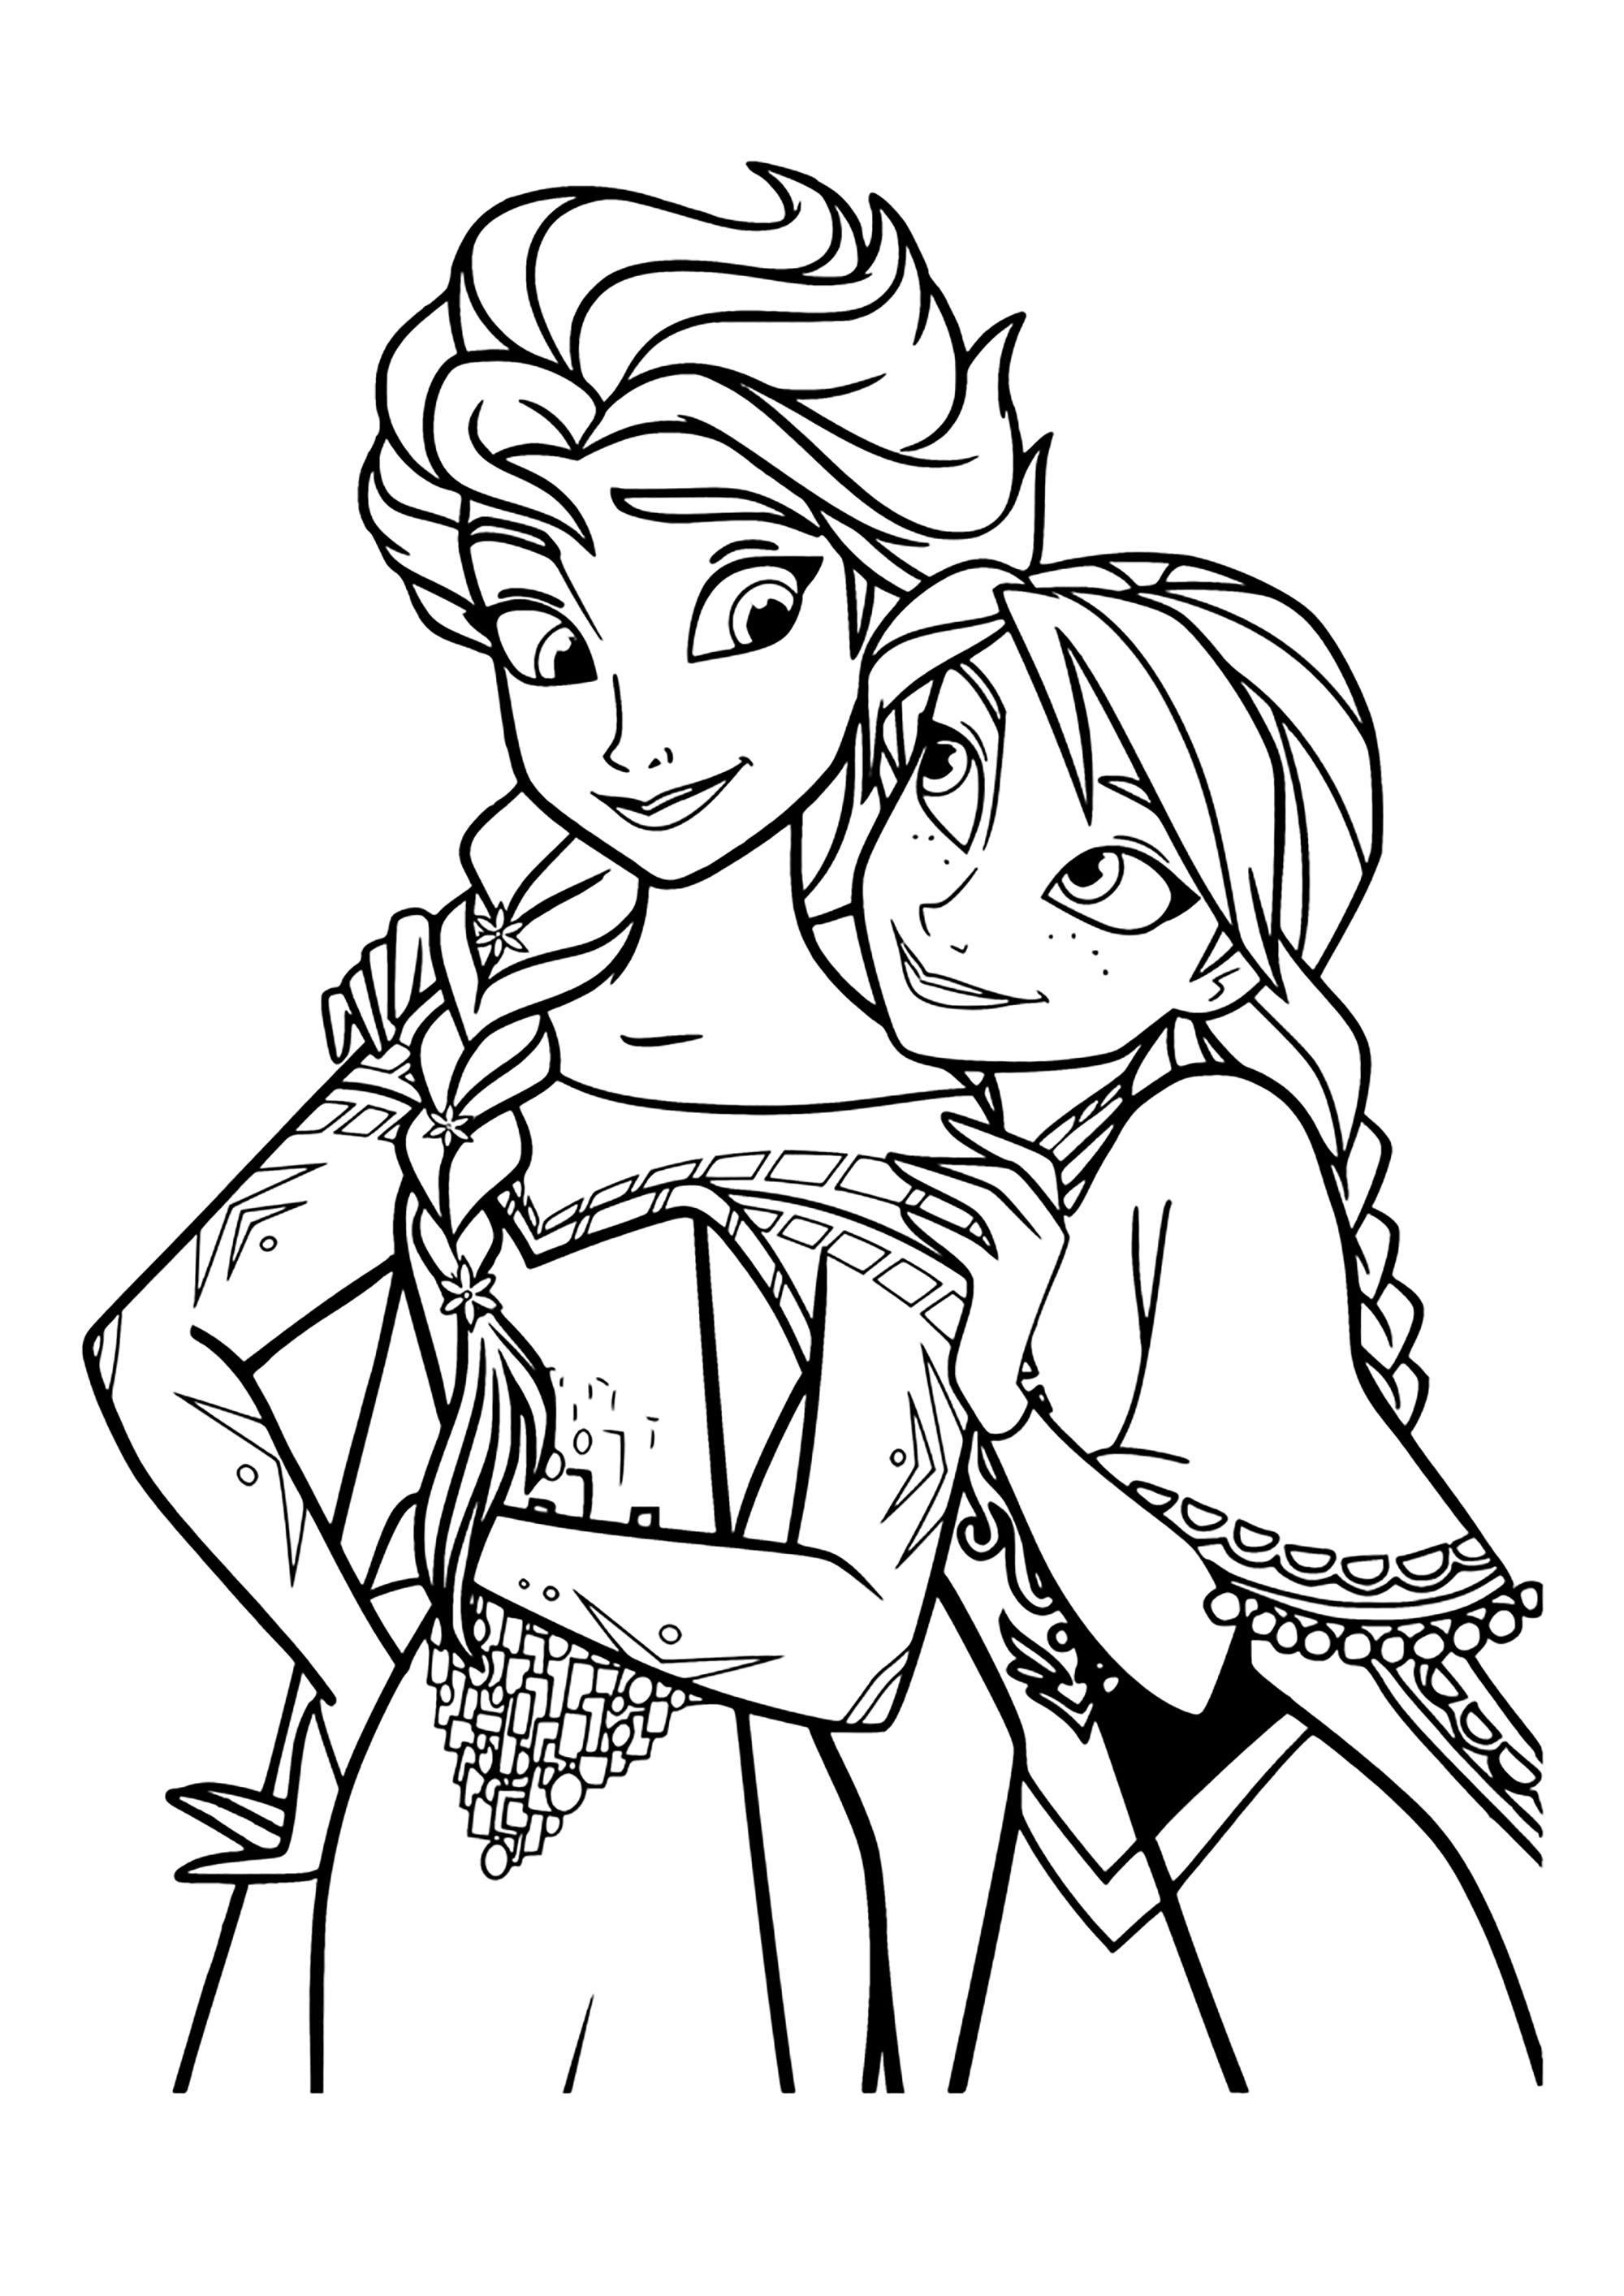 Frozen 2 to color for kids - Frozen 2 Kids Coloring Pages